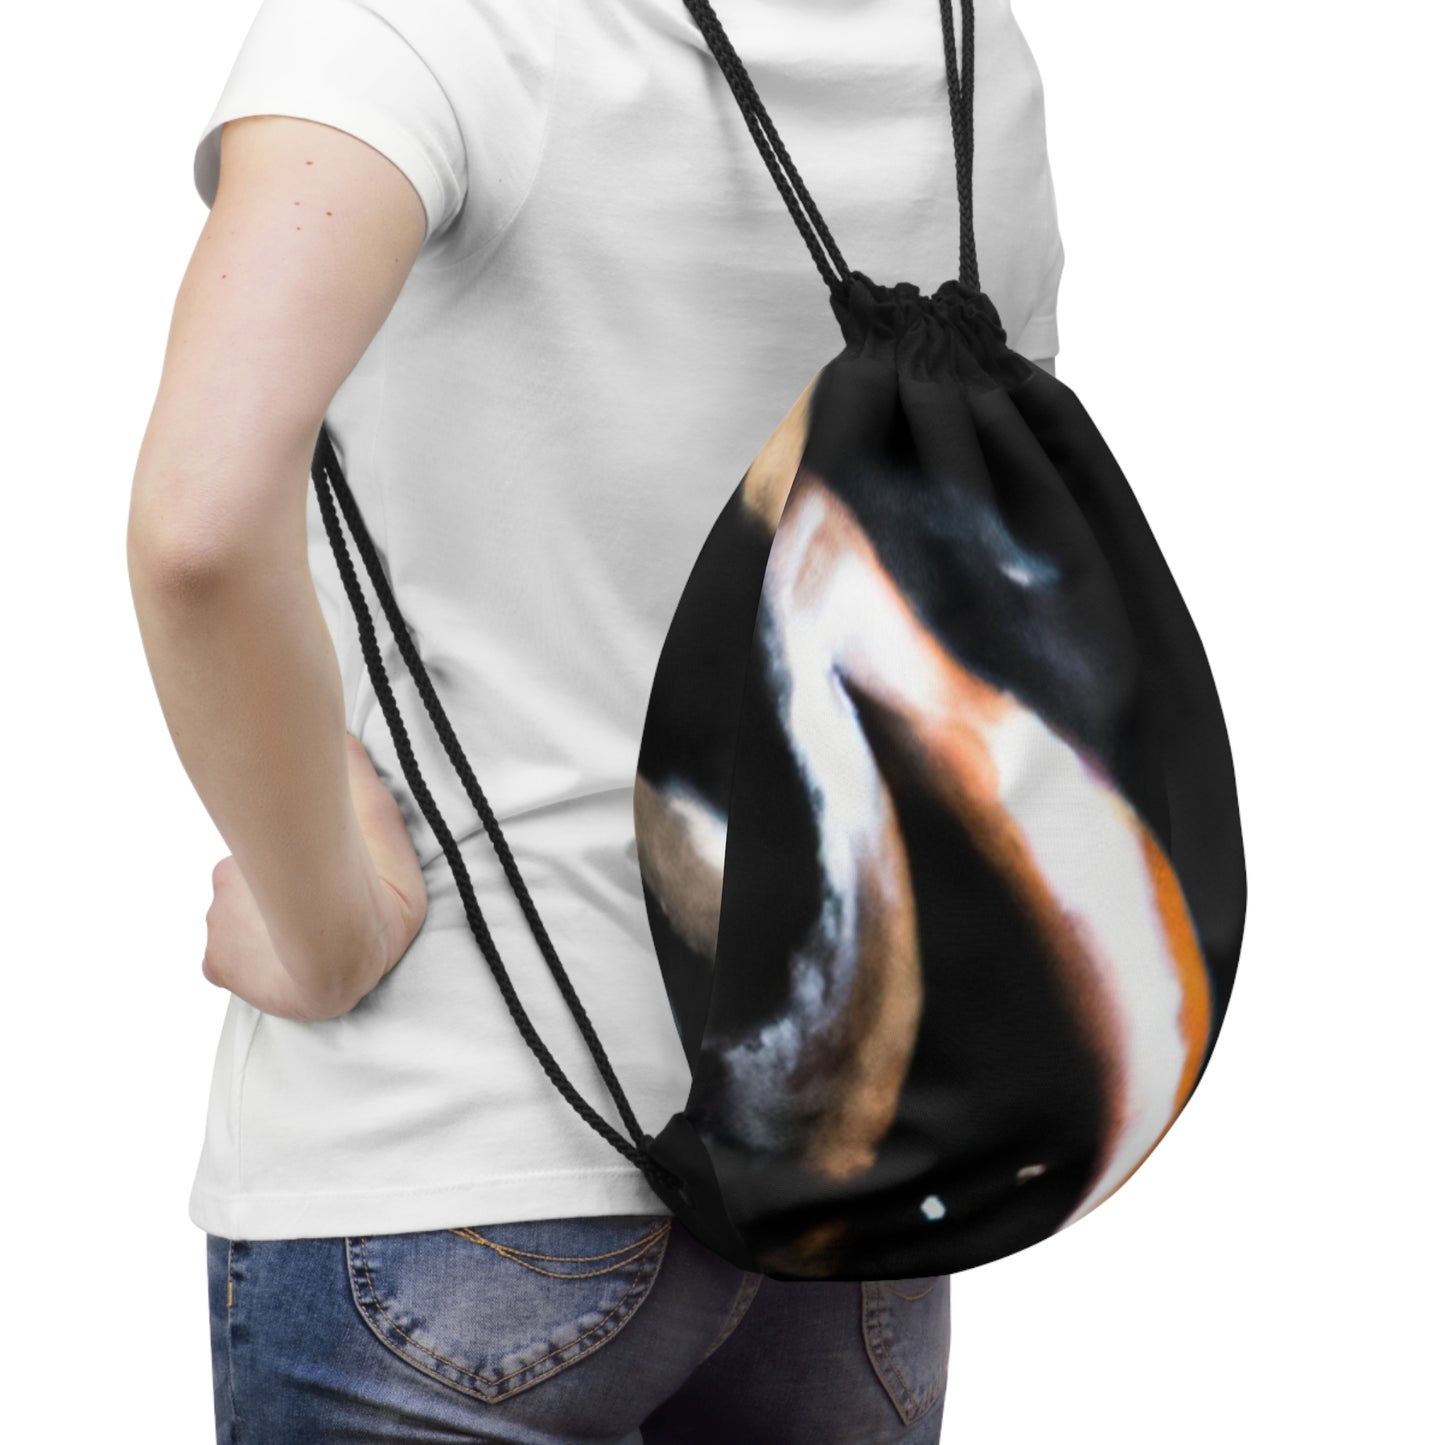 Dynamic Movements in Motion: Capturing the Energy of Sport Through Art - Go Plus Drawstring Bag